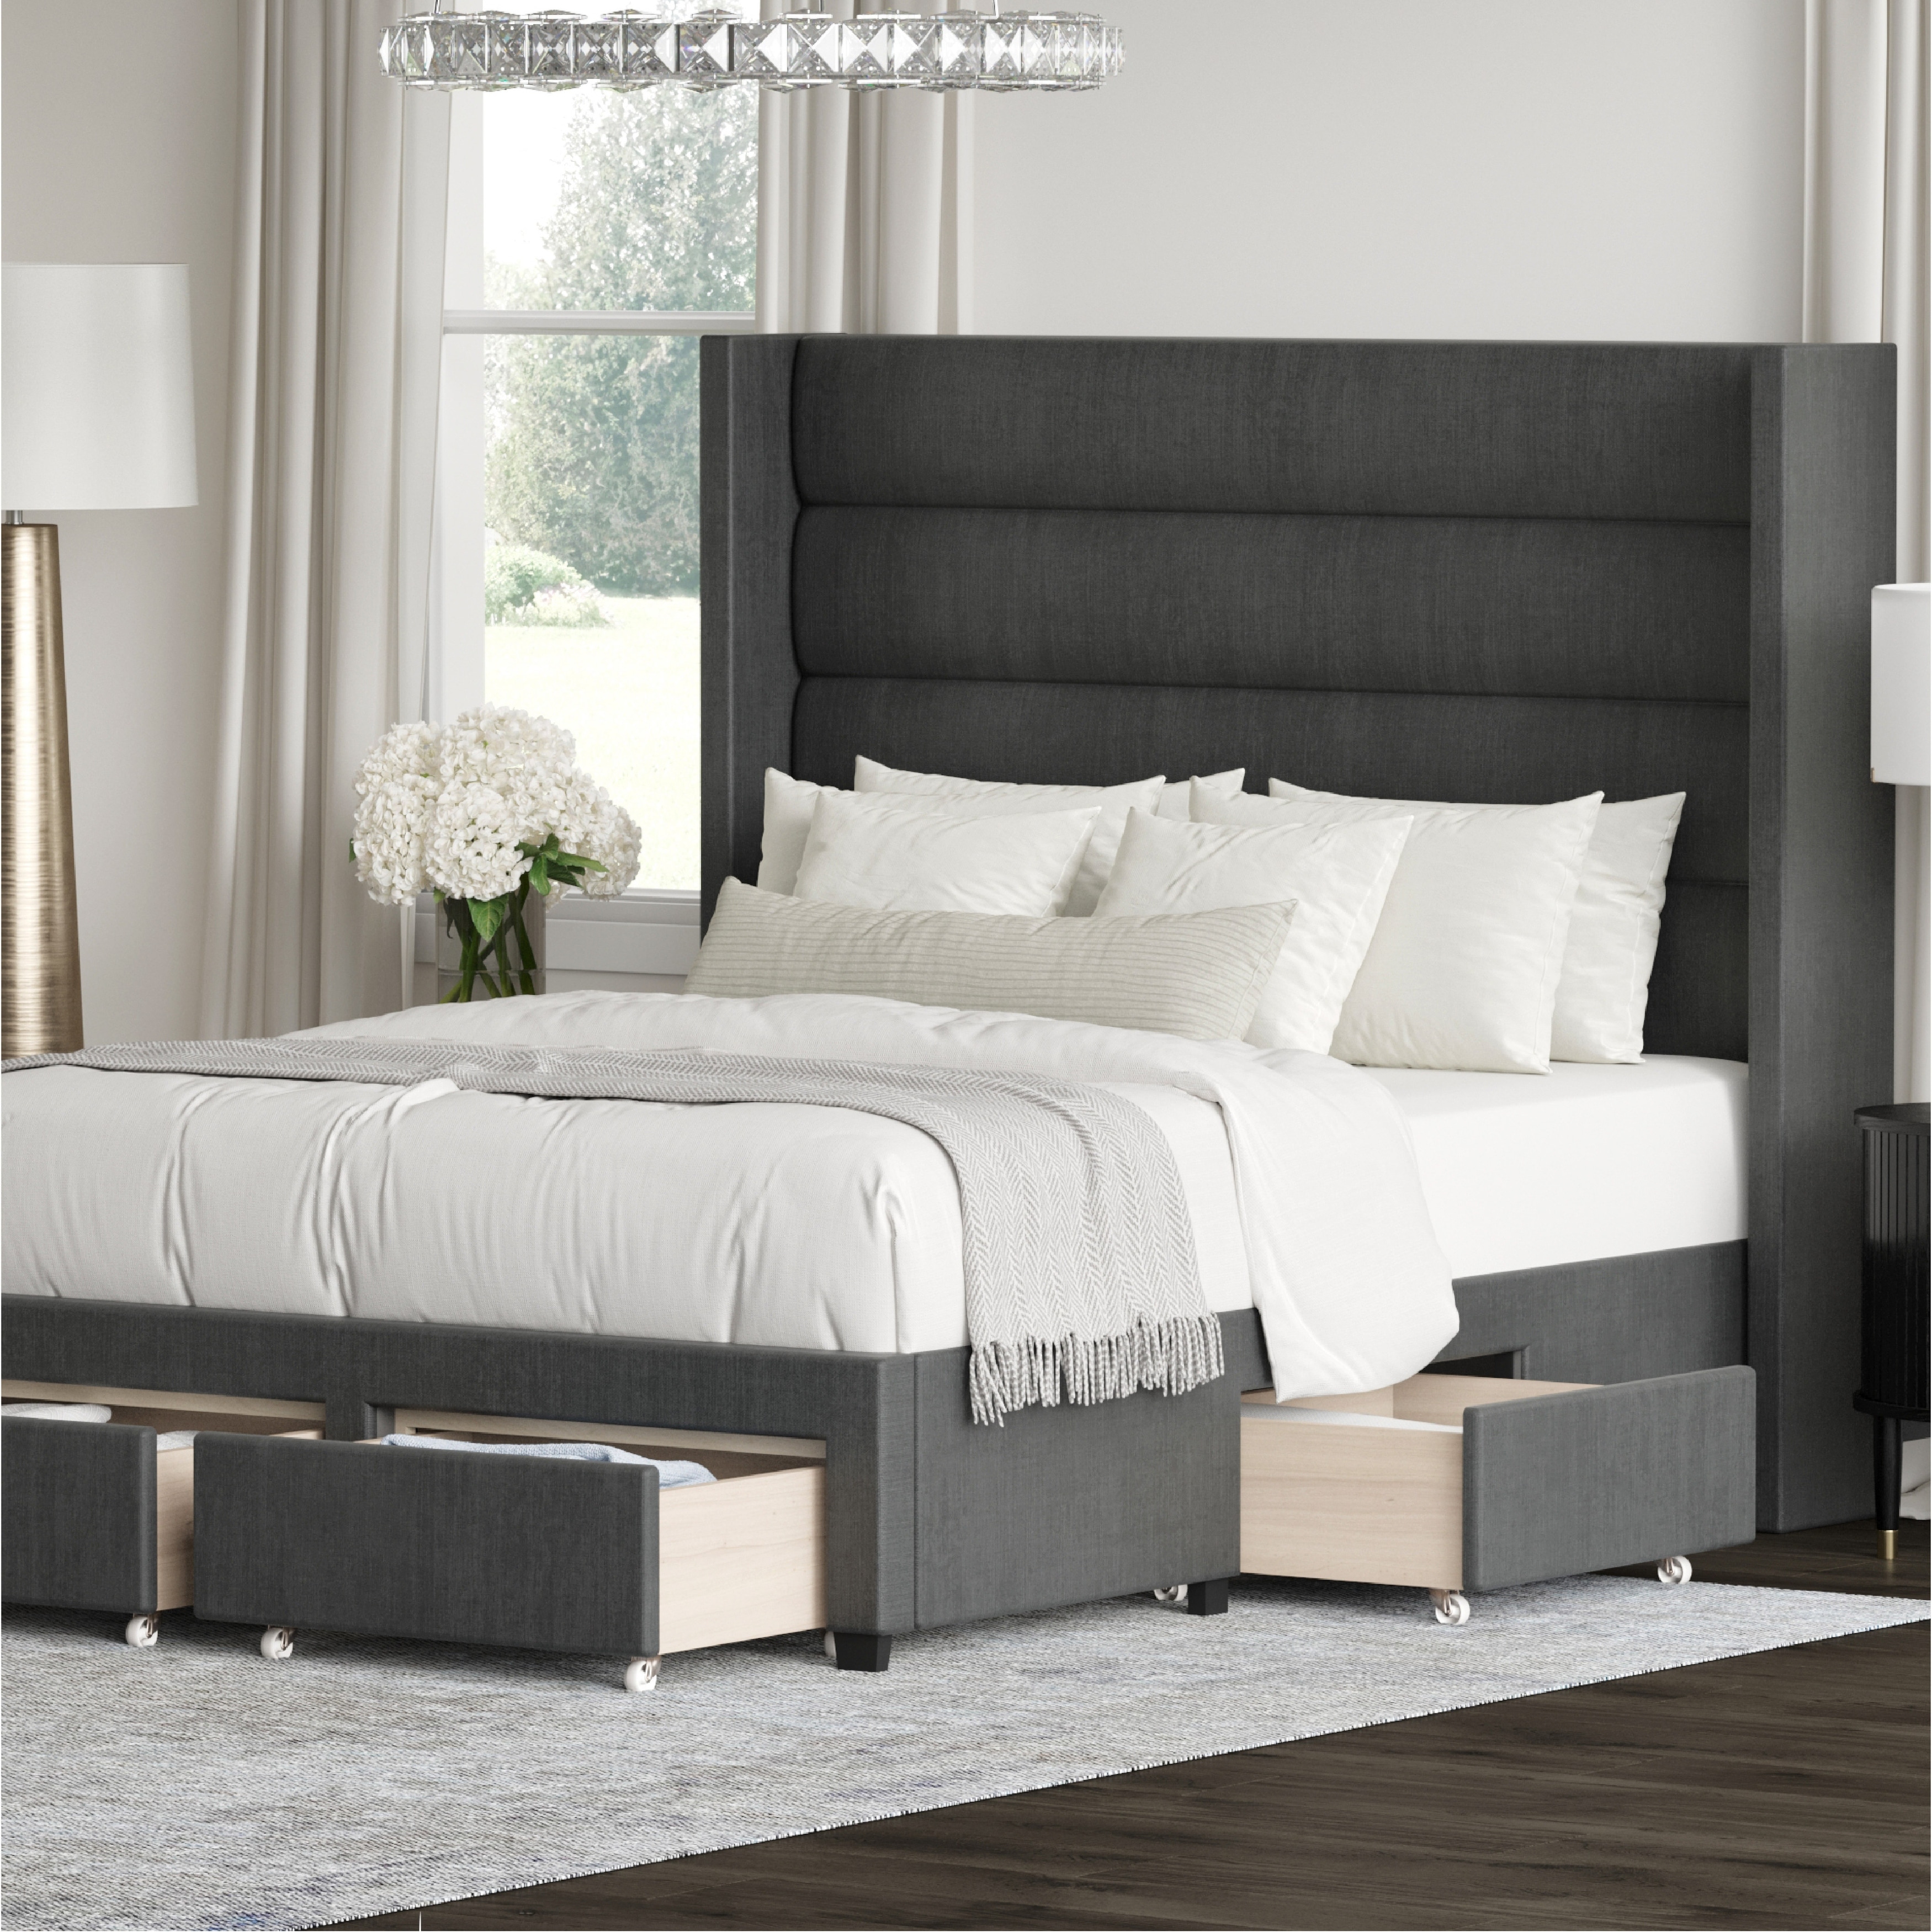 DG Casa George Charcoal Upholstered 4 Drawer Queen Storage Bed - image 2 of 3